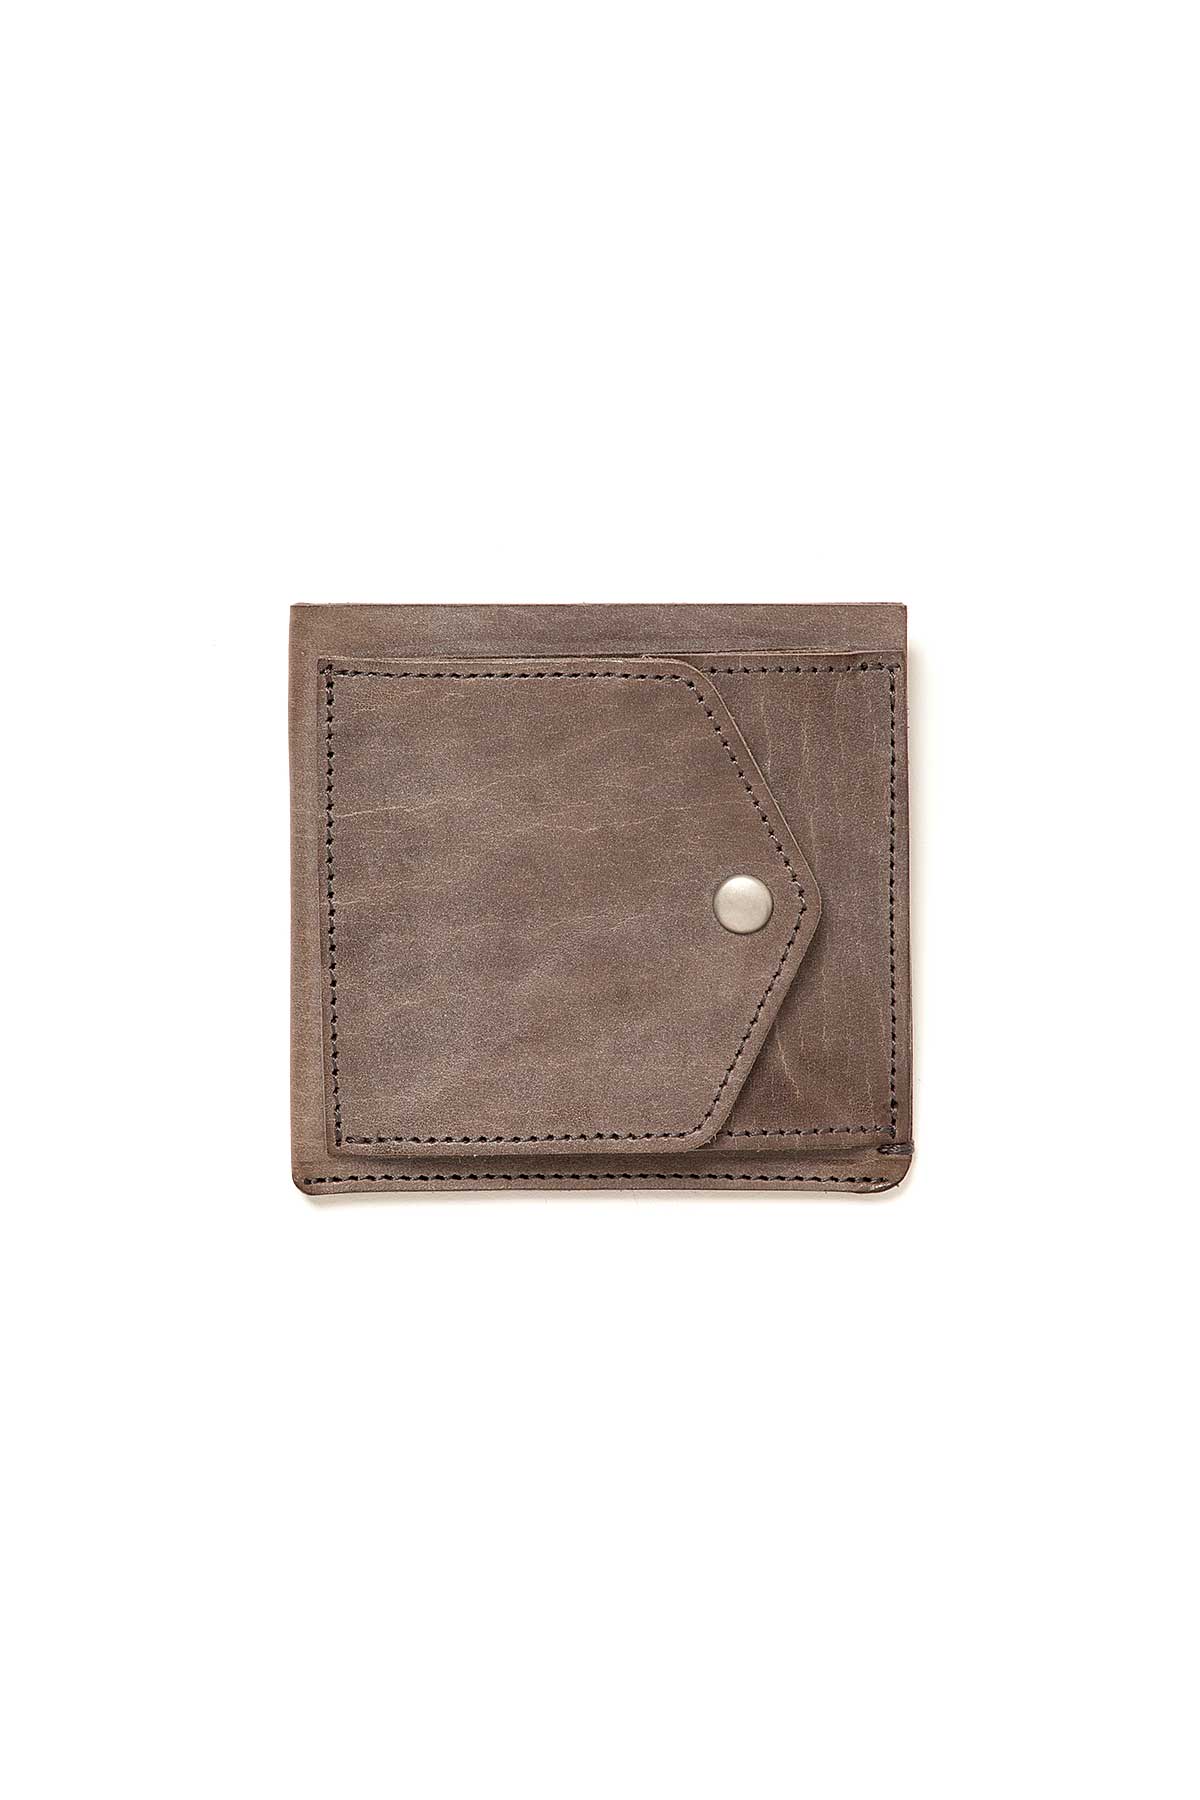 COMPACT WALLET OILED COW LEATHER | hobo